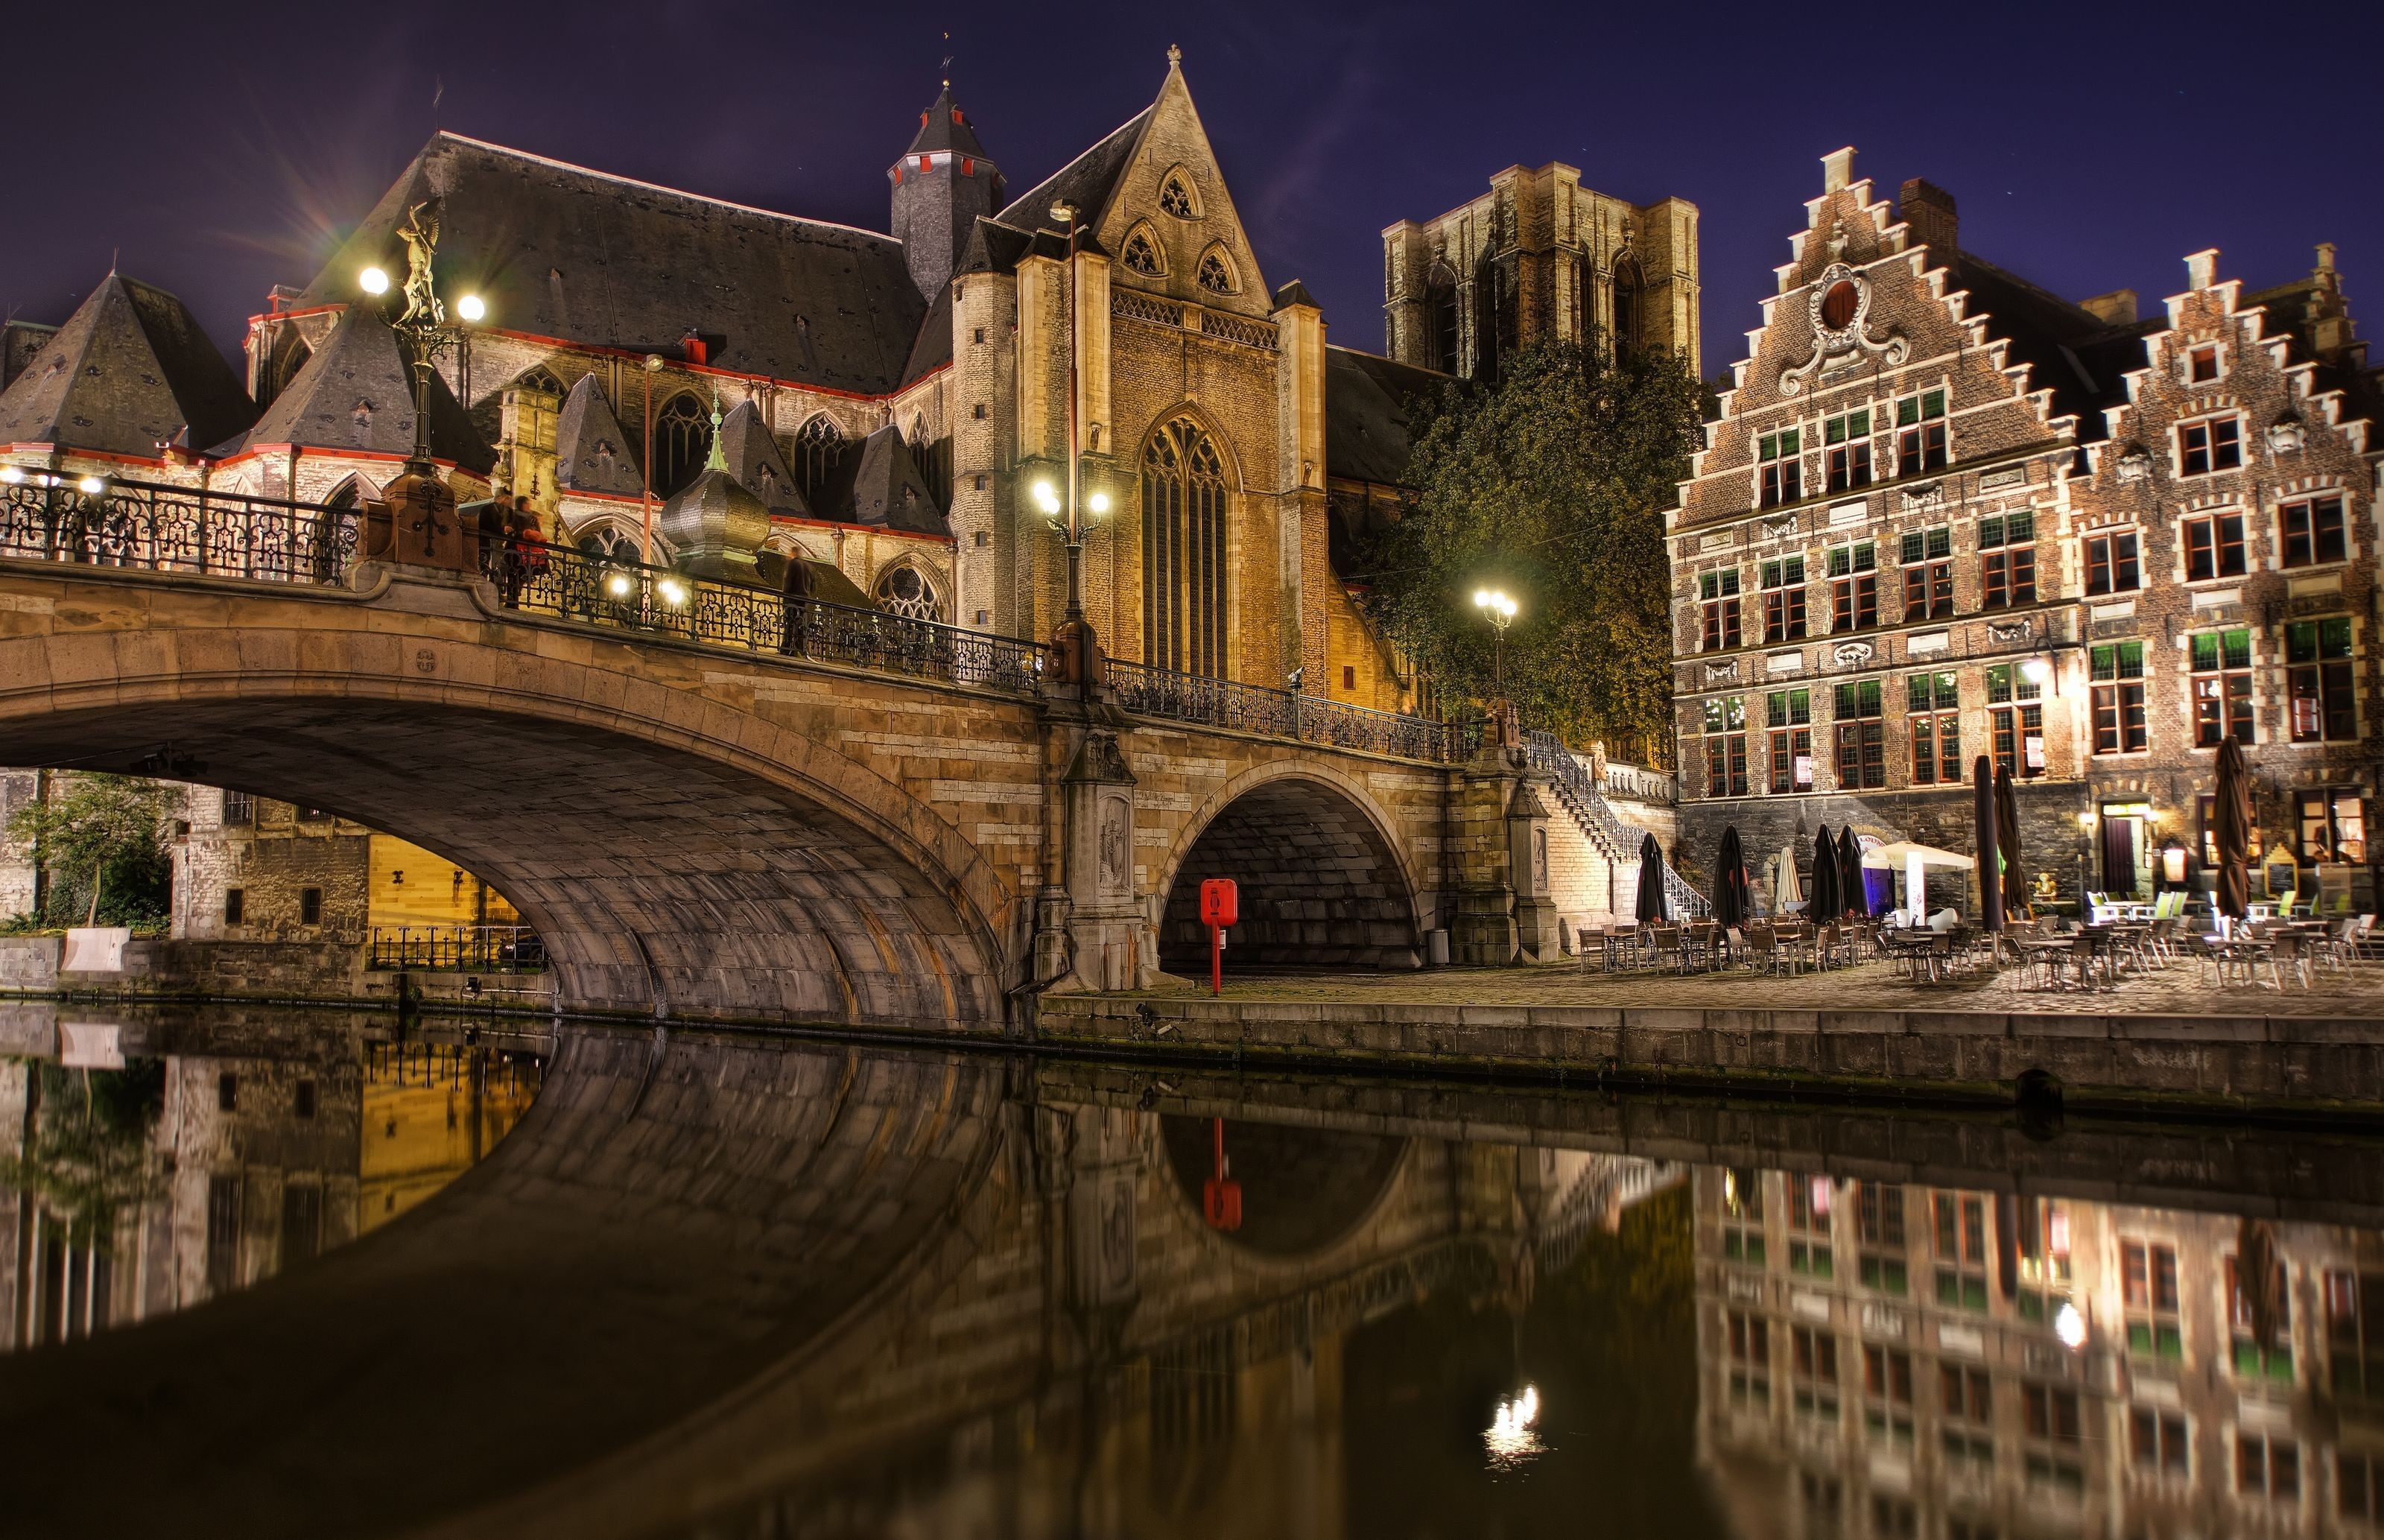 General 3200x2067 cityscape architecture night lights long exposure building bridge river old building reflection church Gent Belgium town house tower ancient water cathedral